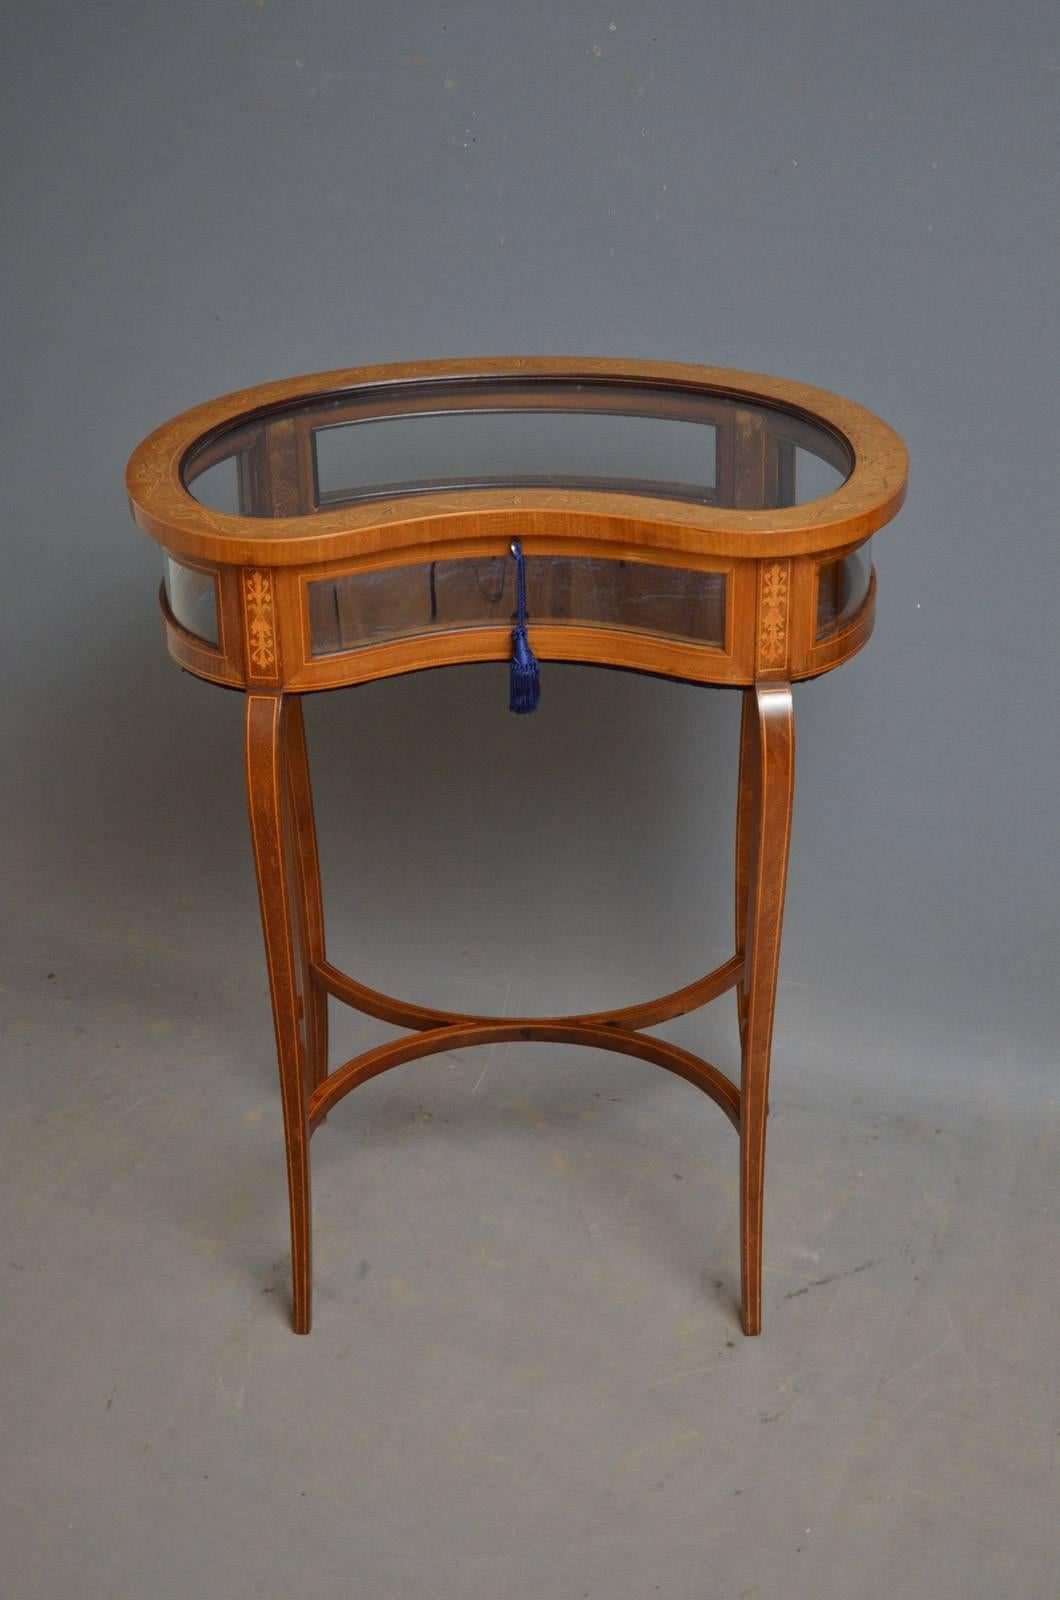 Sn4365, a stunning, Edwardian, kidney shaped, display table in mahogany, having hinged top with neoclassical marquetry fitted with original working lock and a key, and glazed sides flanked by finely inlaid panels, raised on tapering, outswept legs